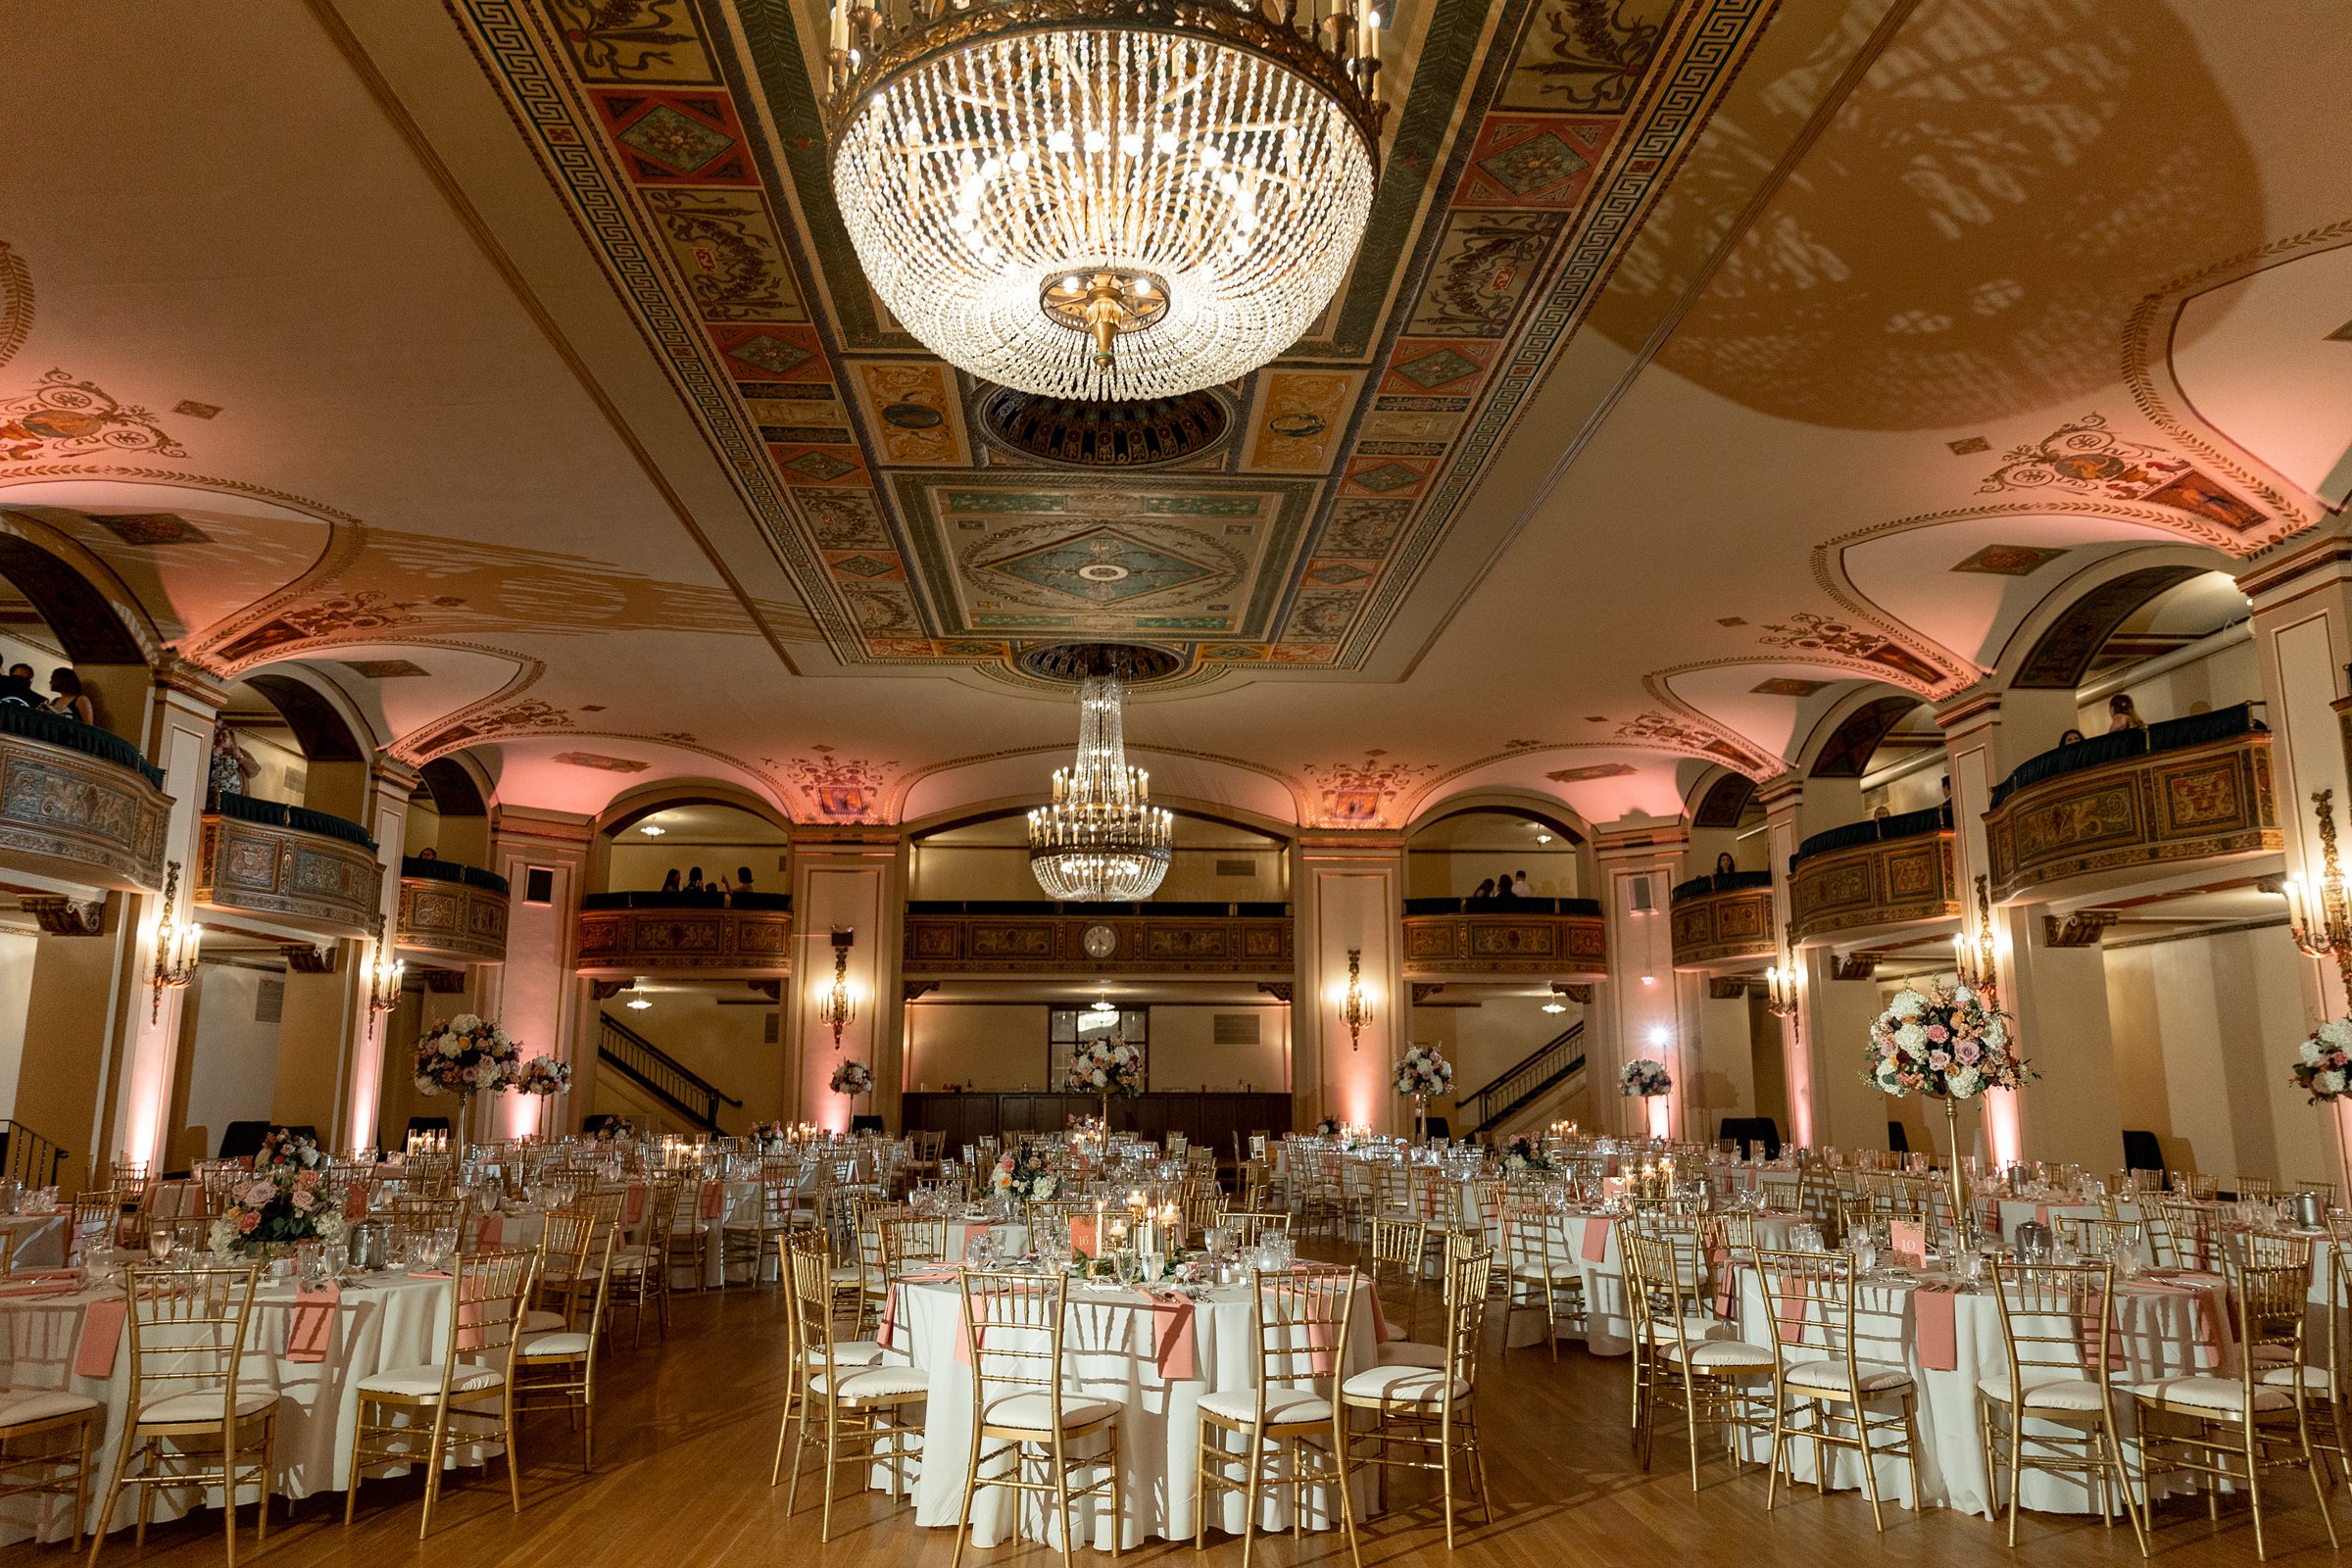 Image of the ballroom at the Masonic Temple in Detroit by Michele Maloney Photography